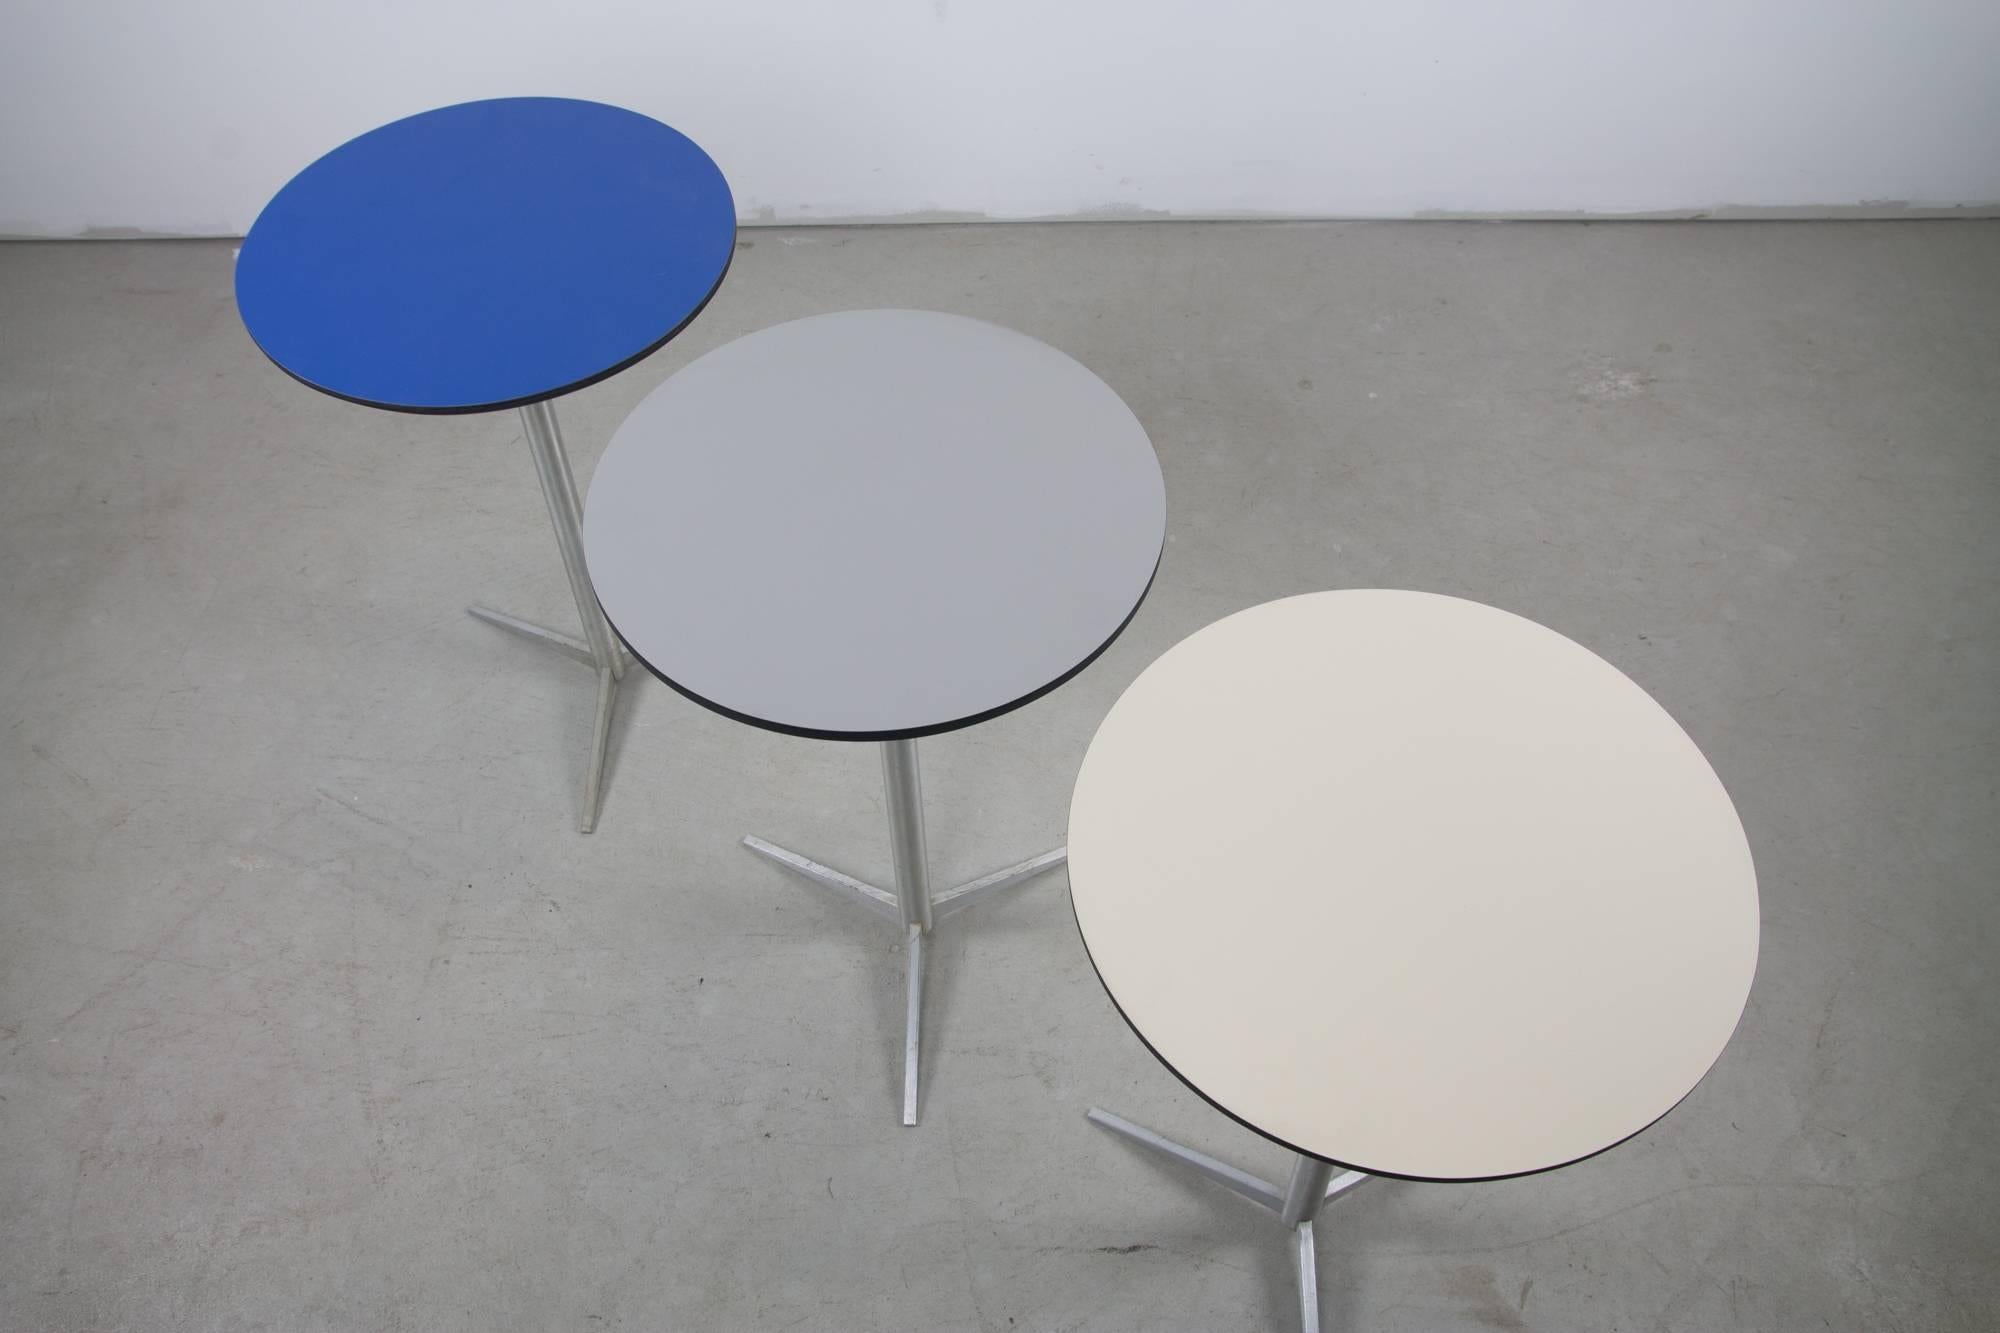 A scarcely seen set of three drink tables by Paul McCobb for Thonet with stunning, lightweight aluminum bases and custom laminate tops in blue, grey and white.